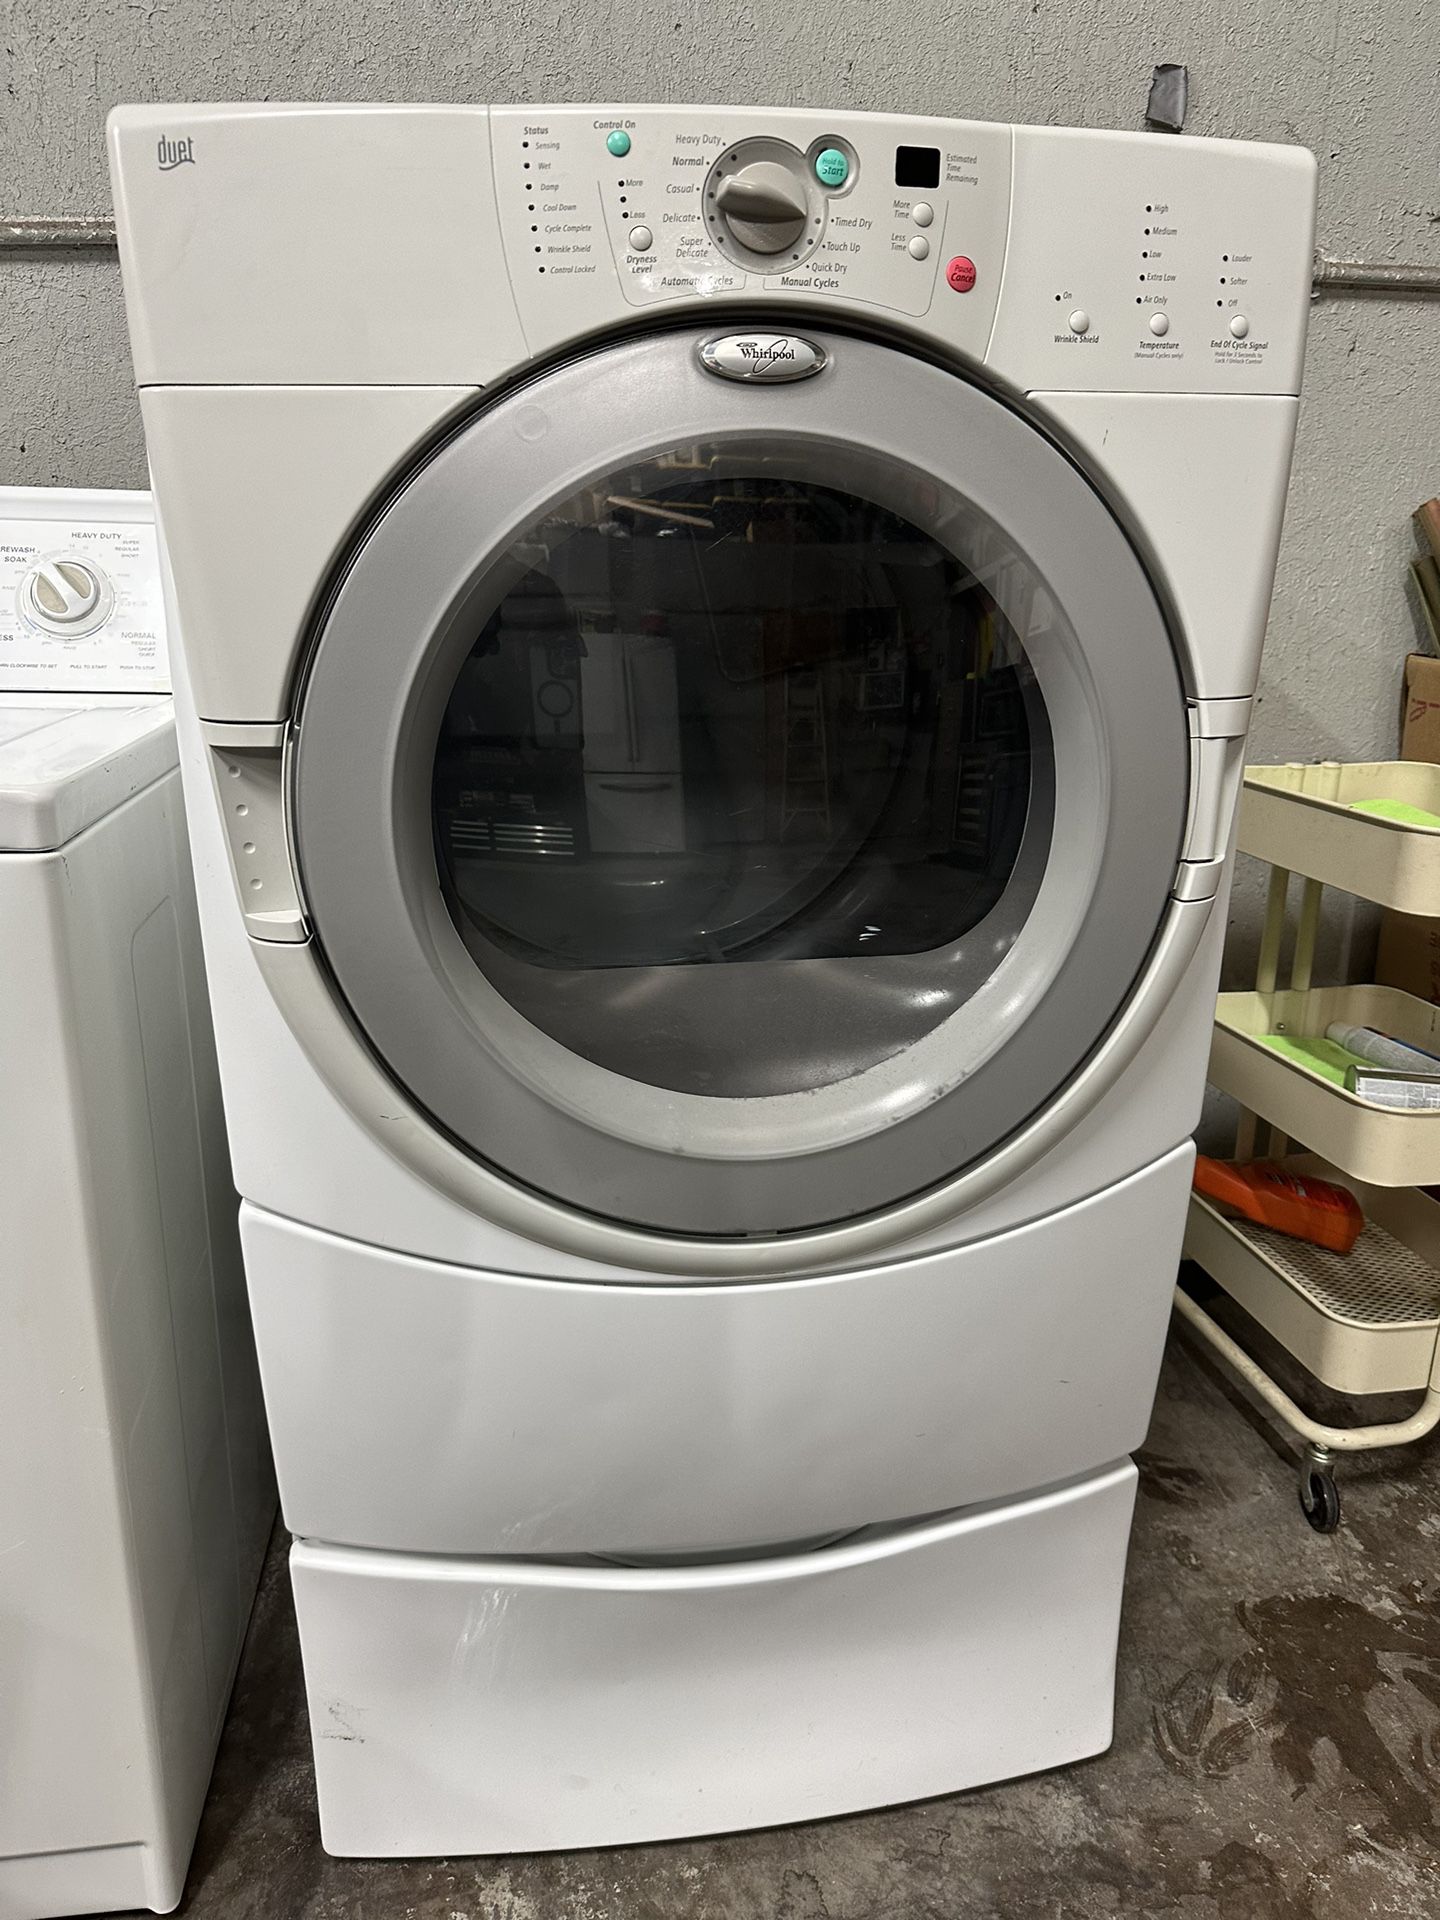 Whirlpool electric dryer on pedestal can deliver